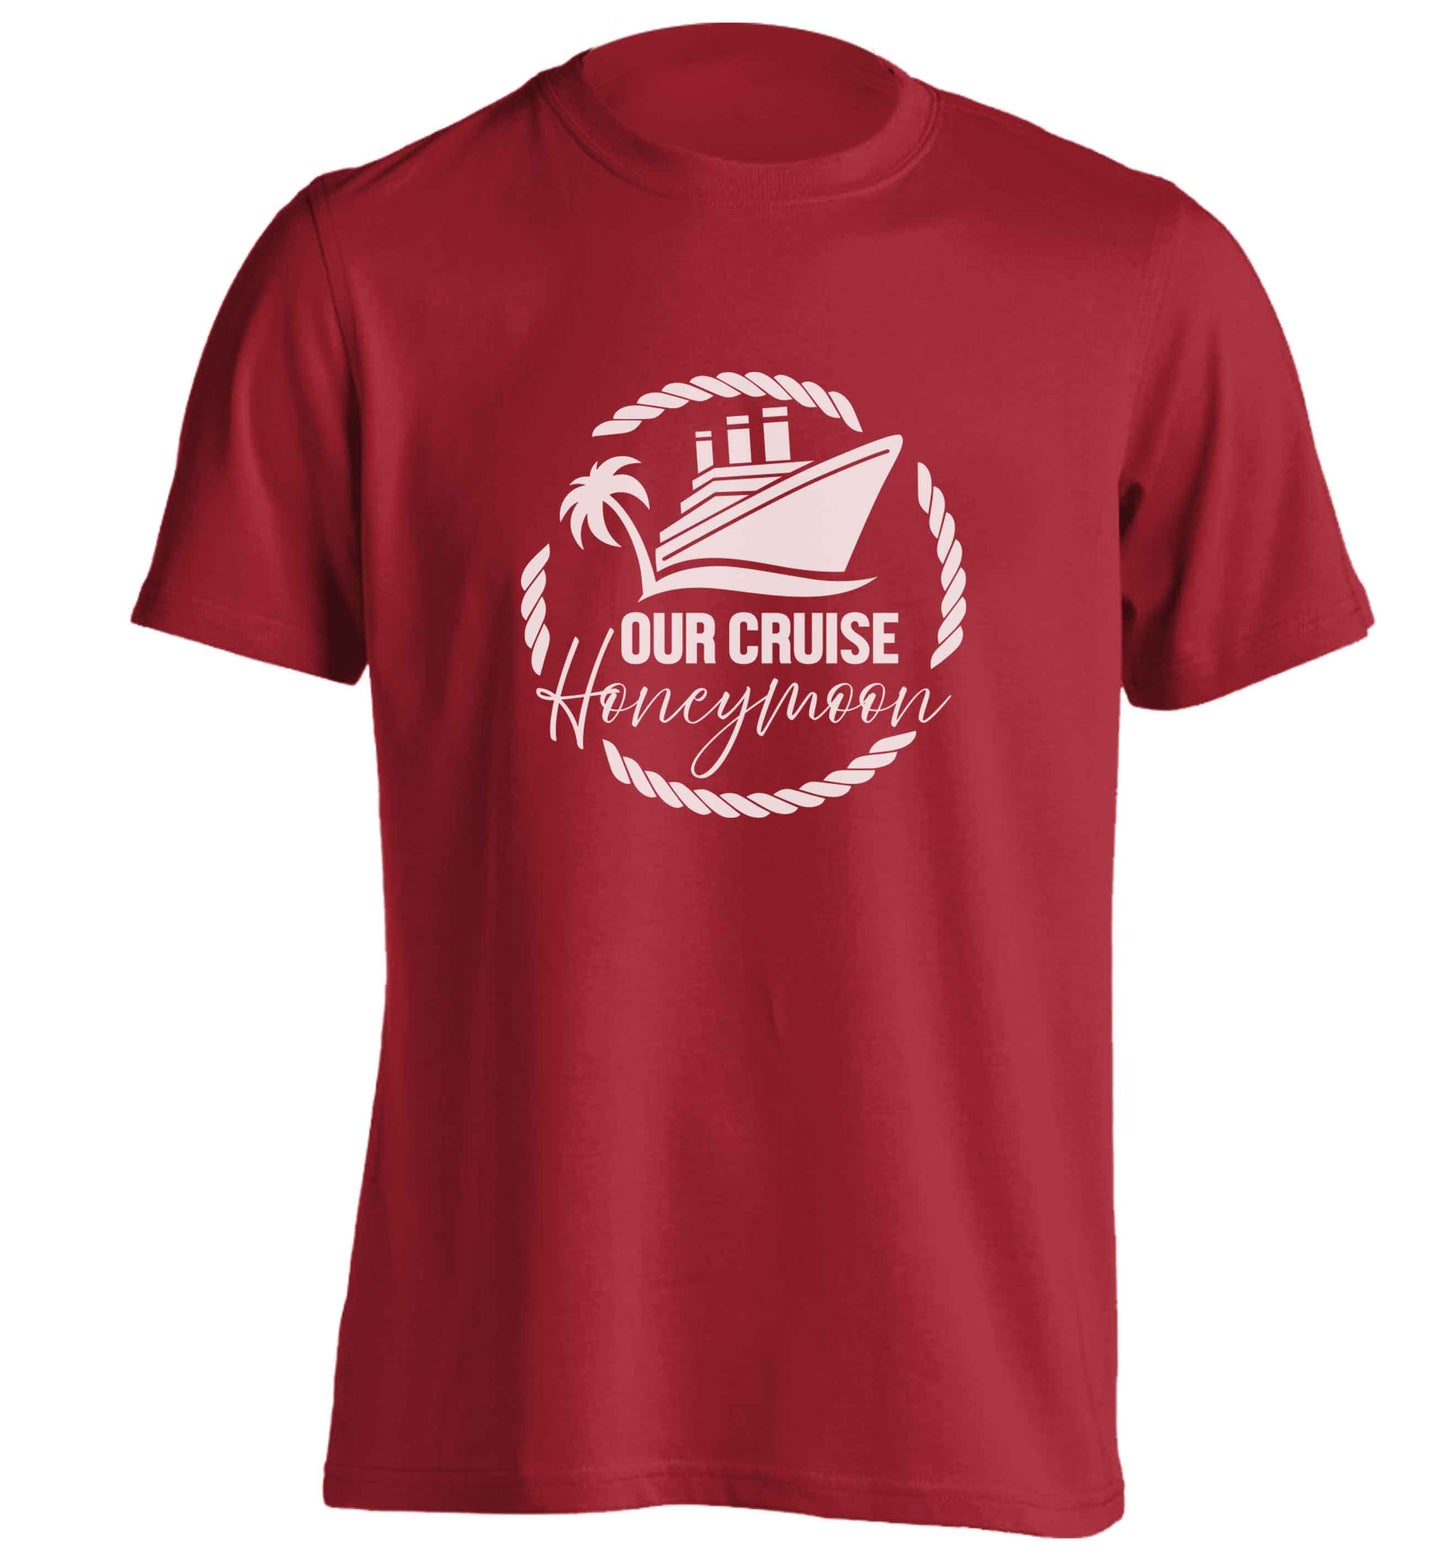 Our cruise honeymoon adults unisex red Tshirt 2XL